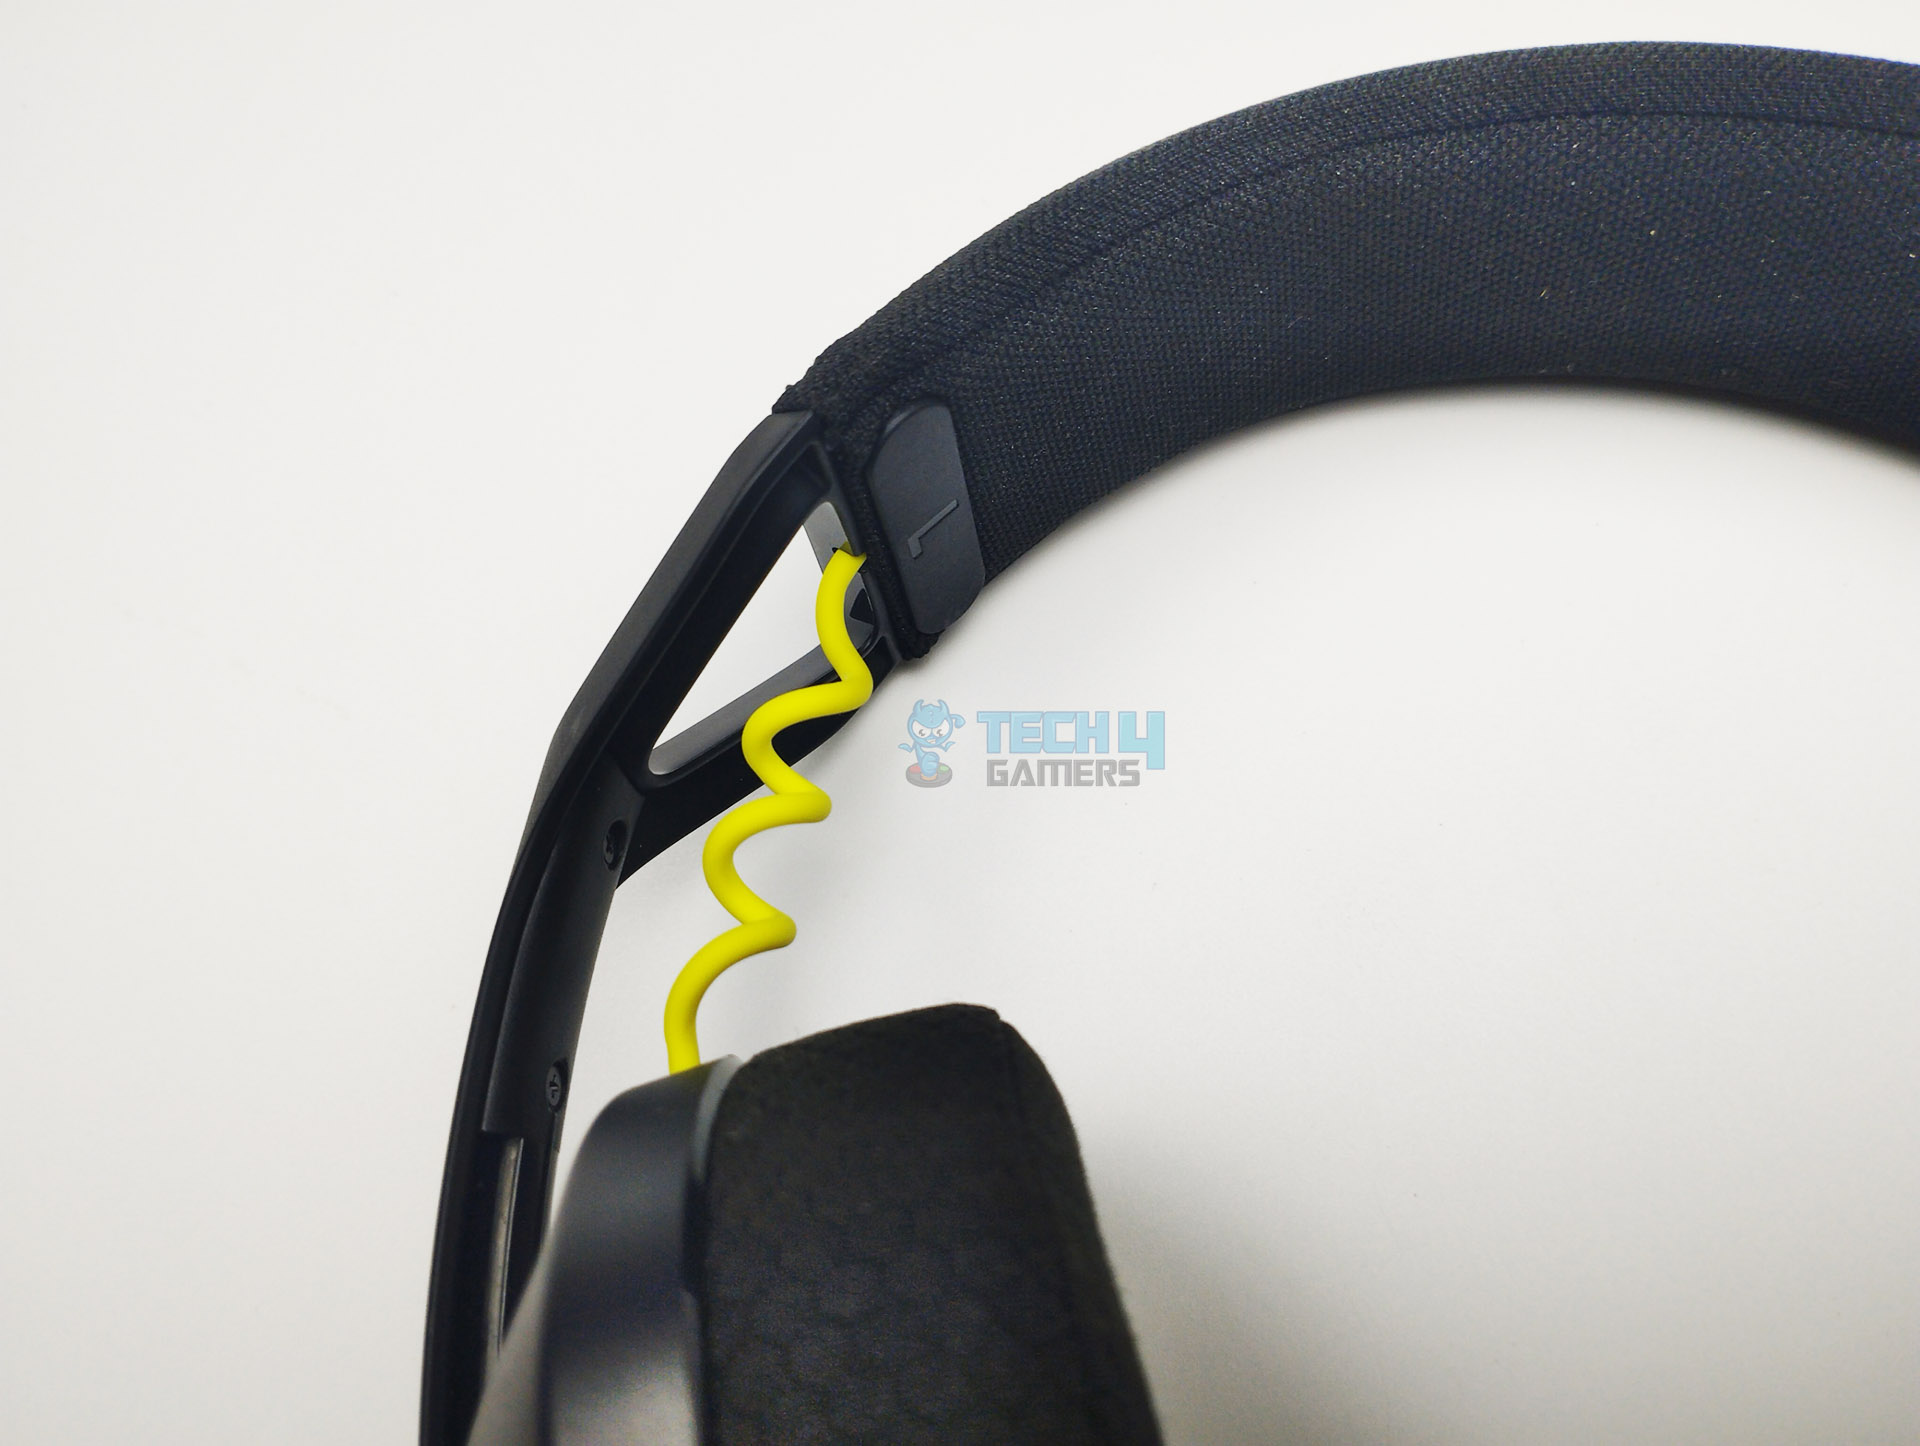 Adjustment Wires (Image By Tech4Gamers)